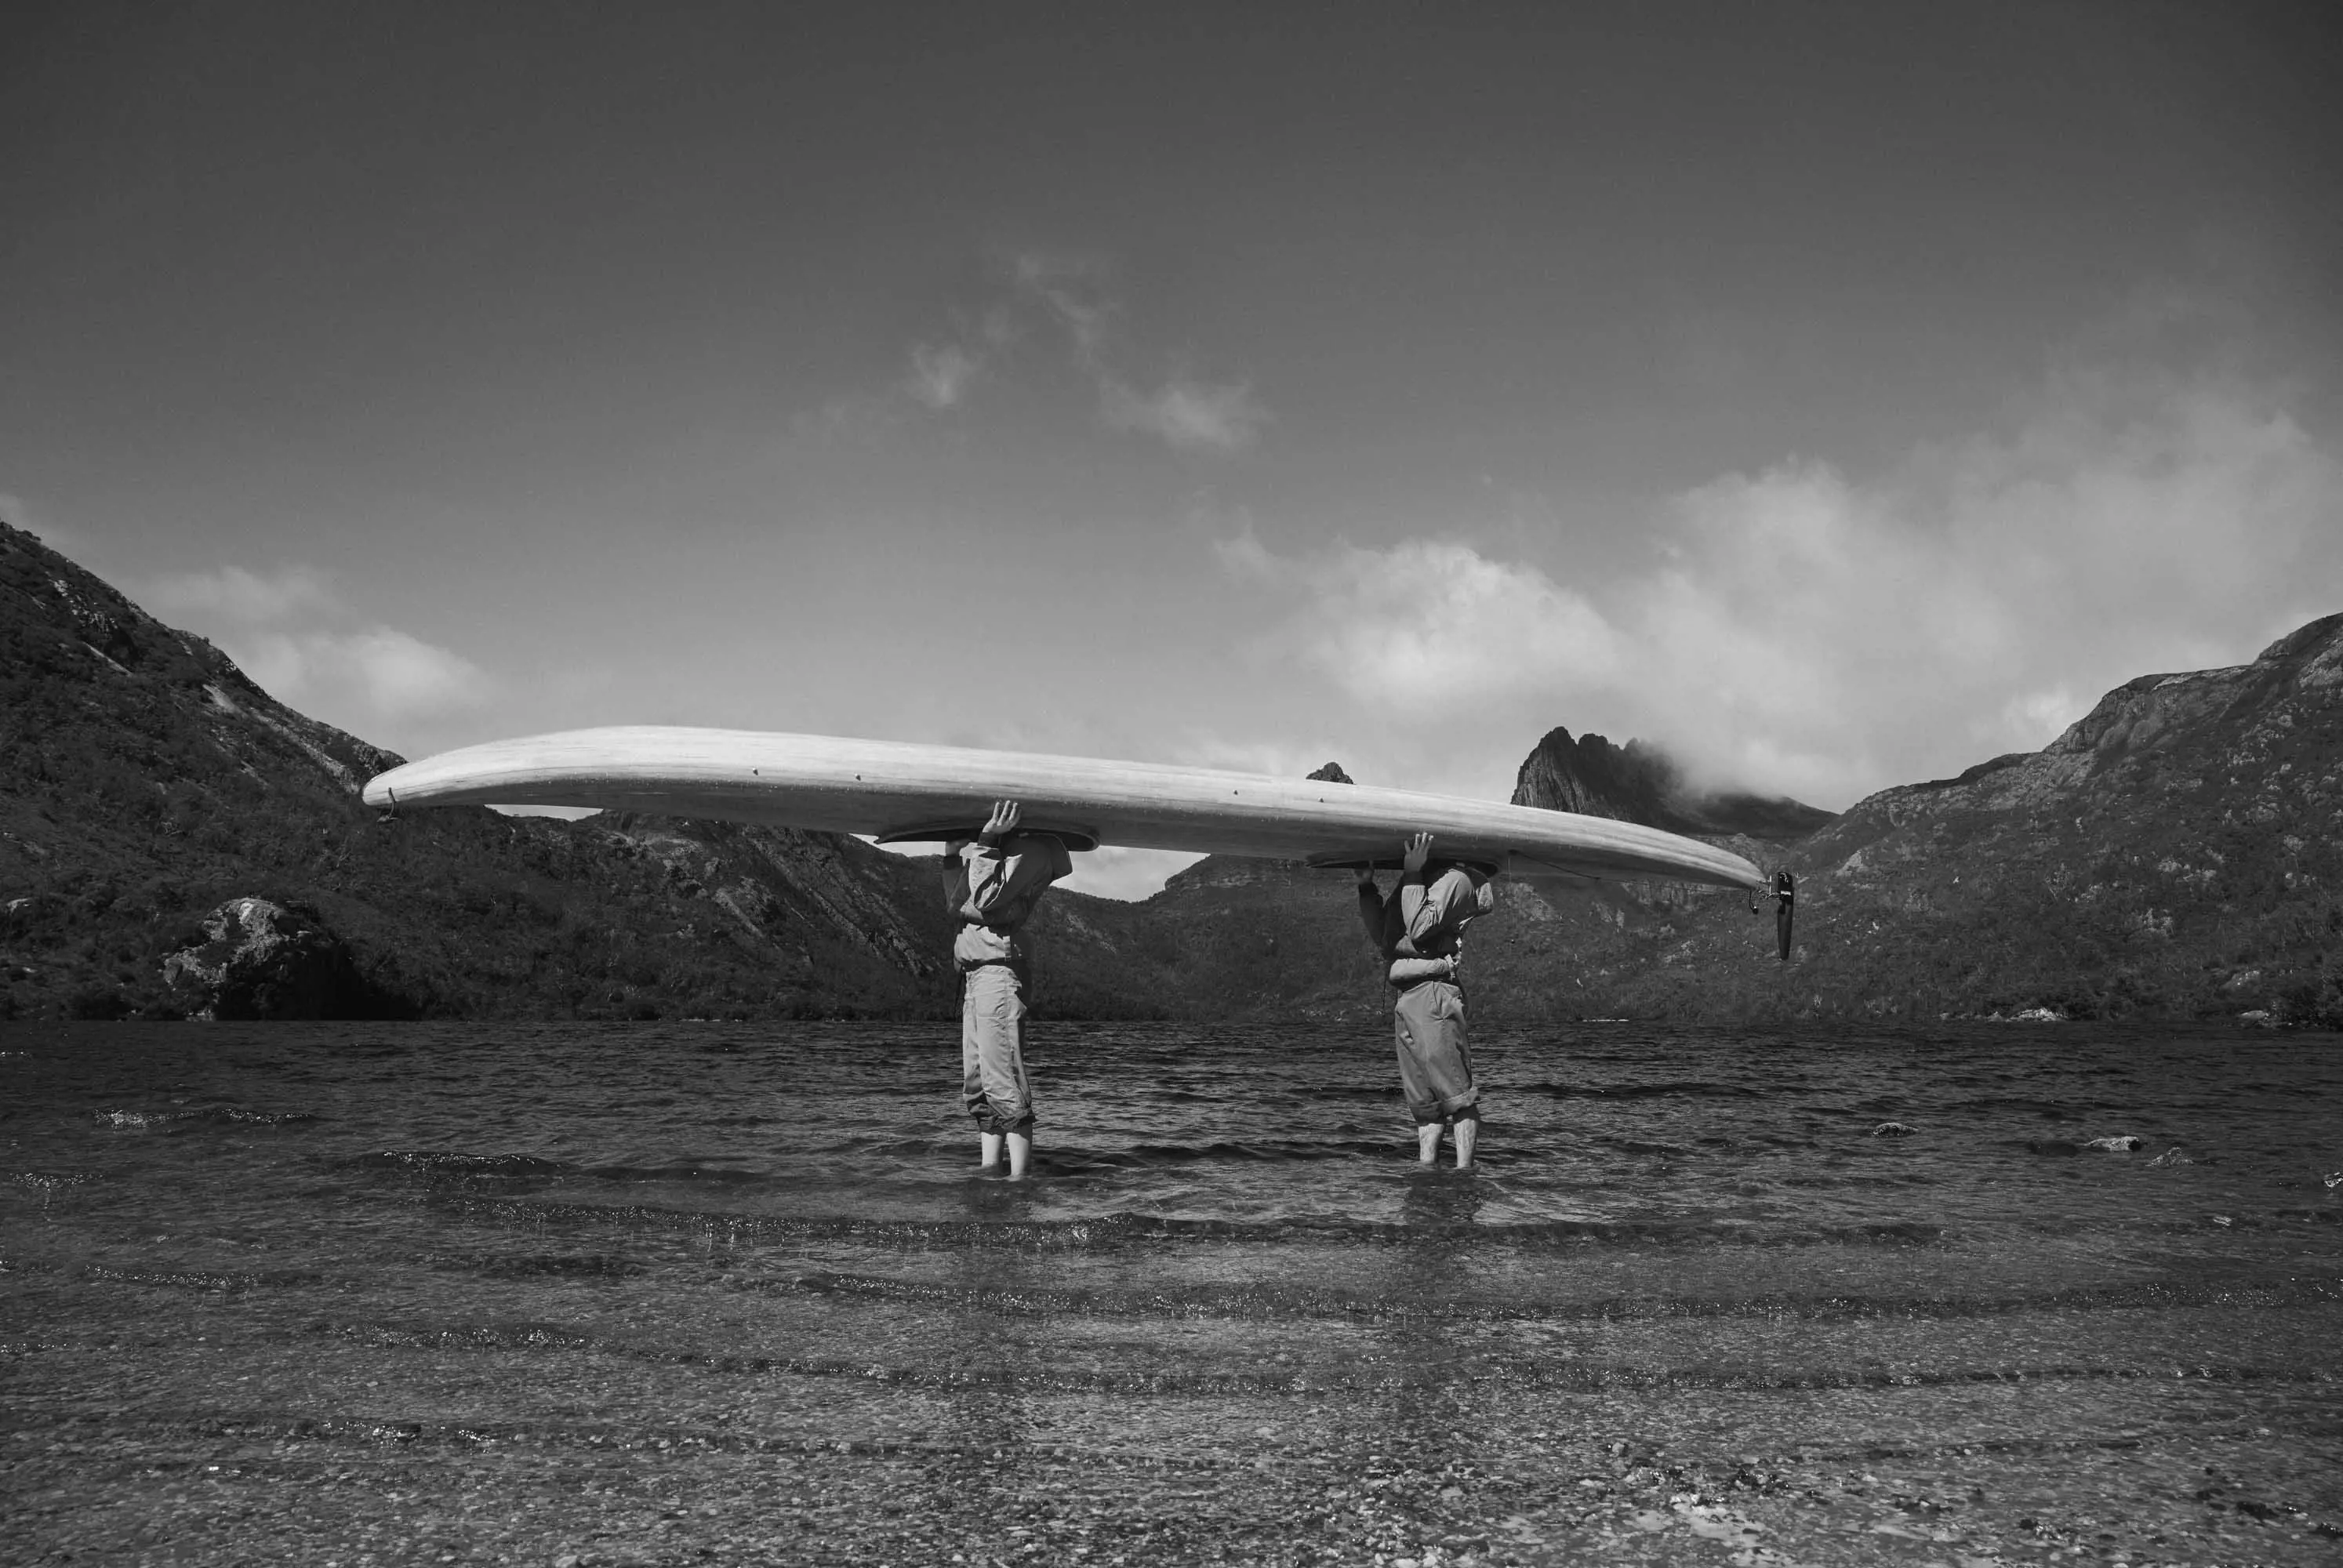 Two people hold a large canoe over their head and stand in the shallow water at the edge of a large lake in front of mountains.